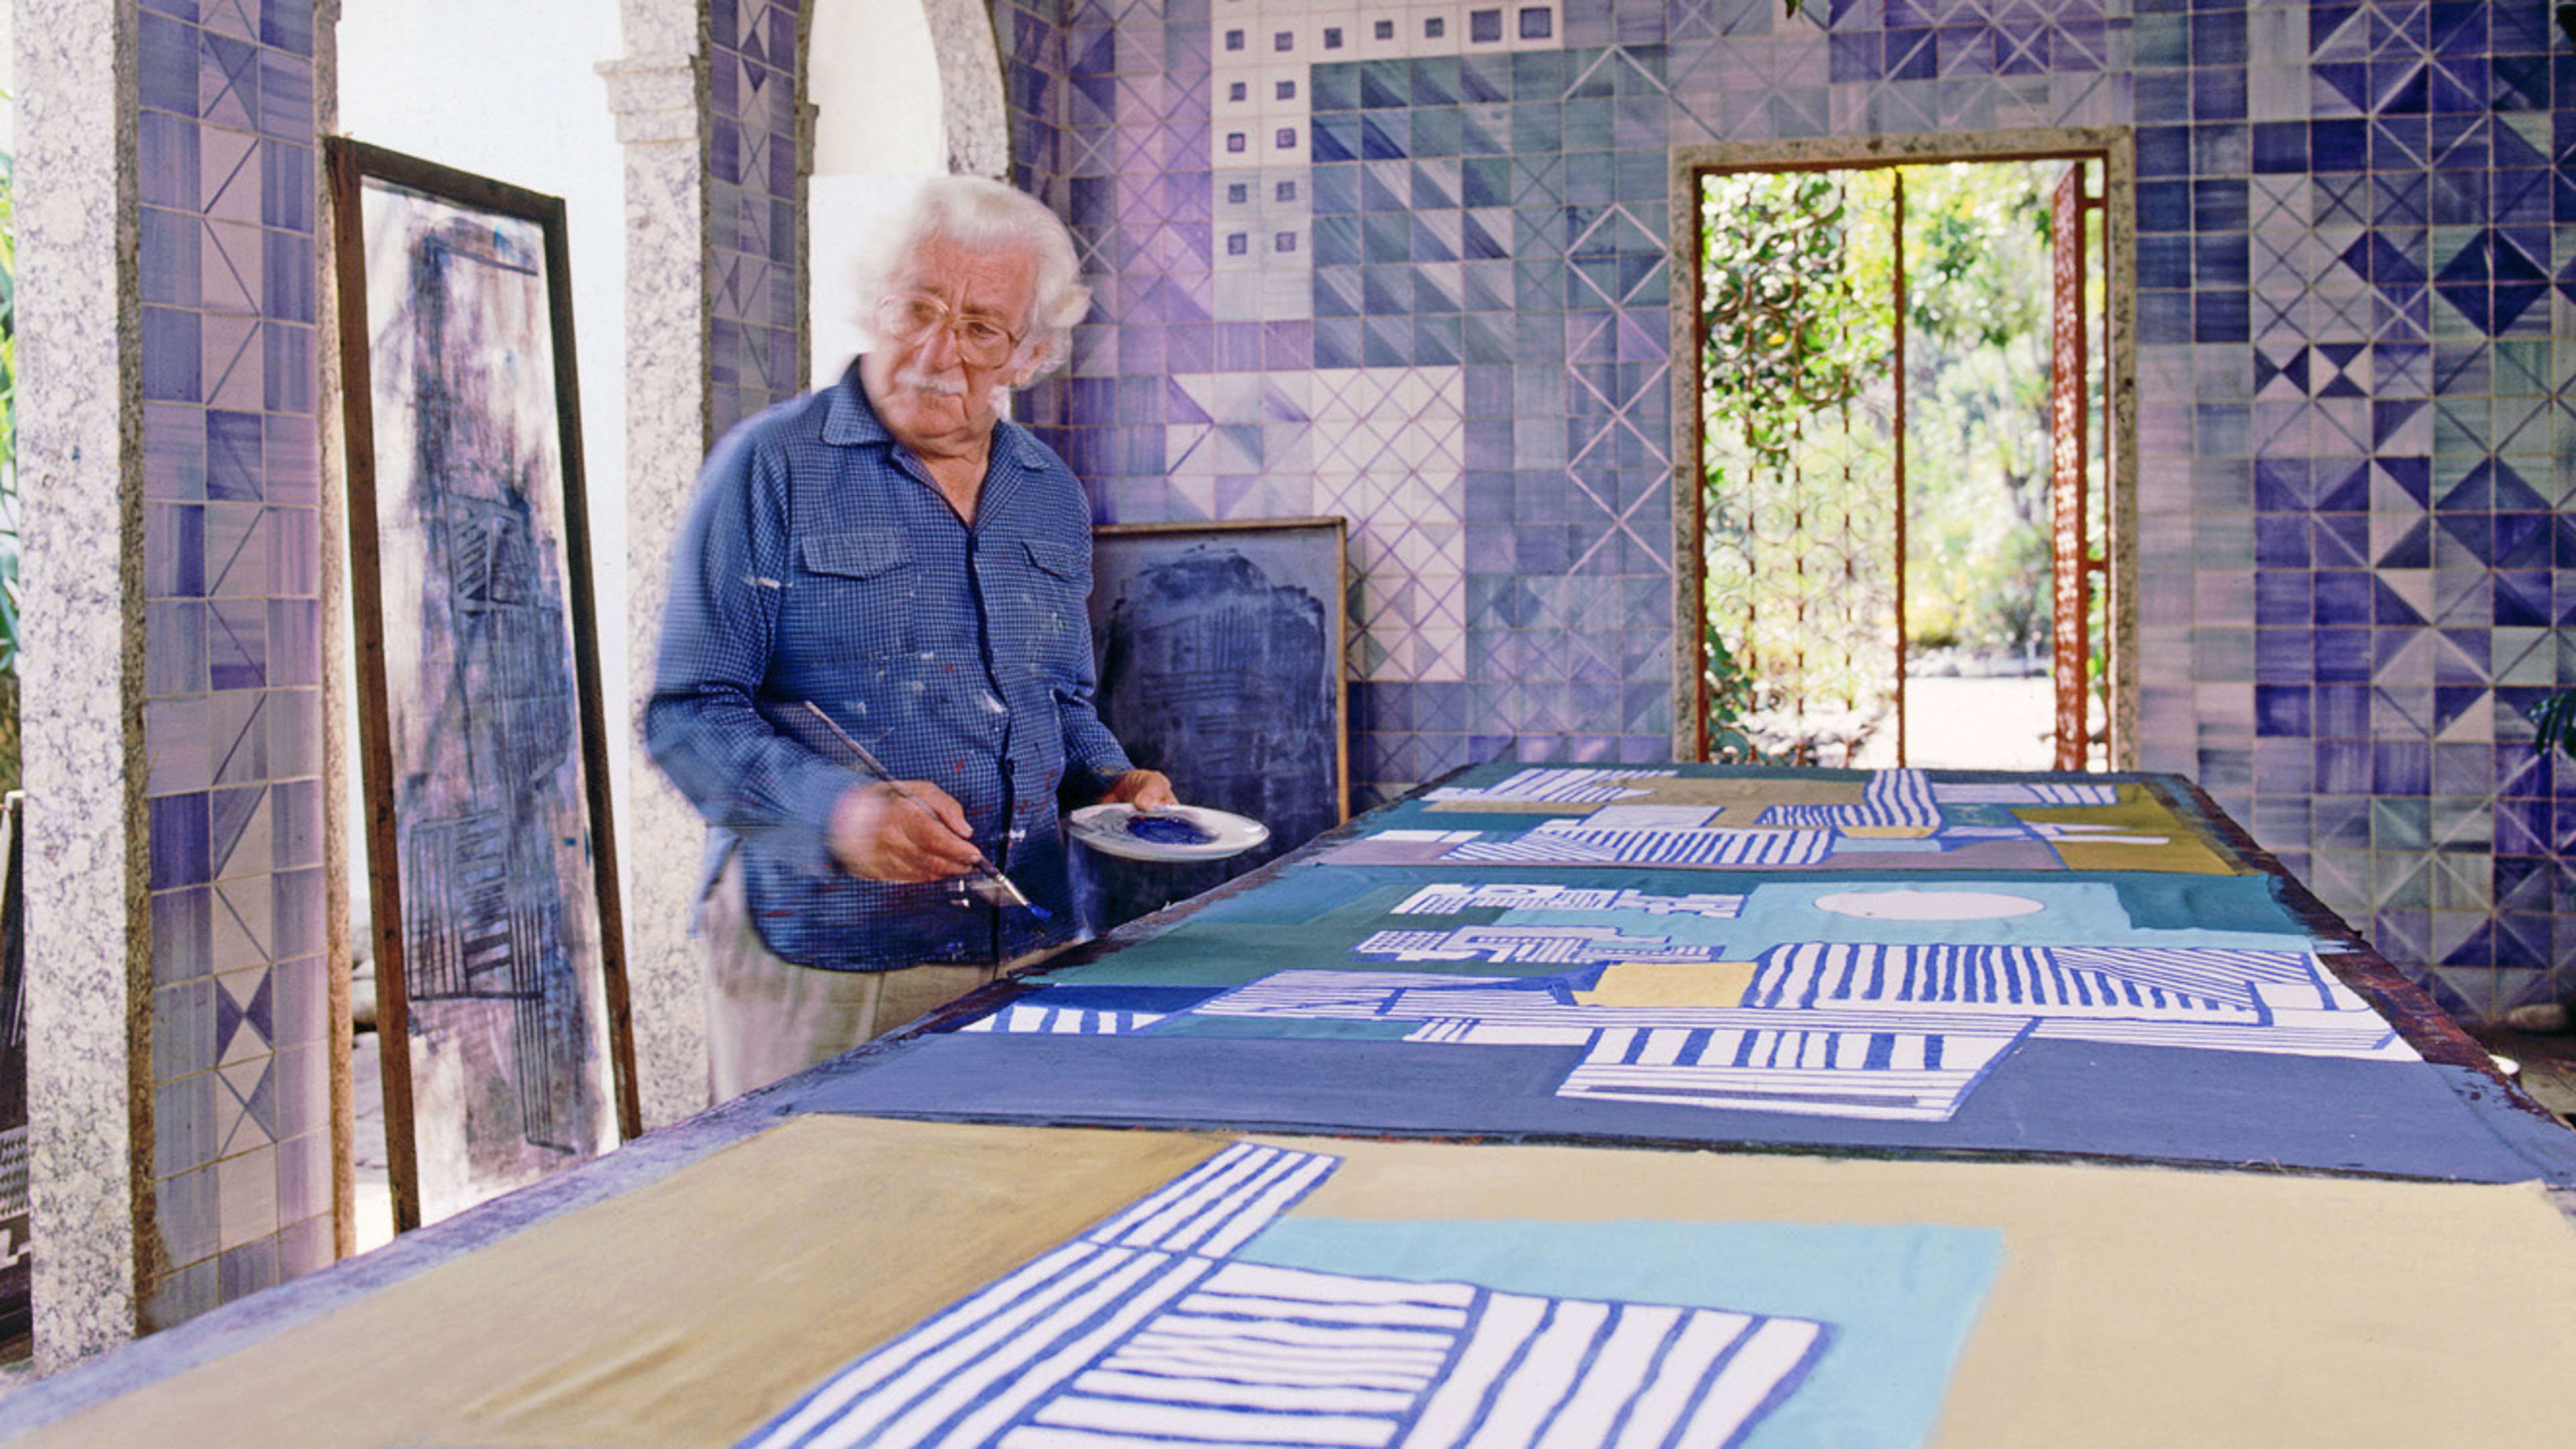 The 20th-century designer whose work could help cities survive in this century